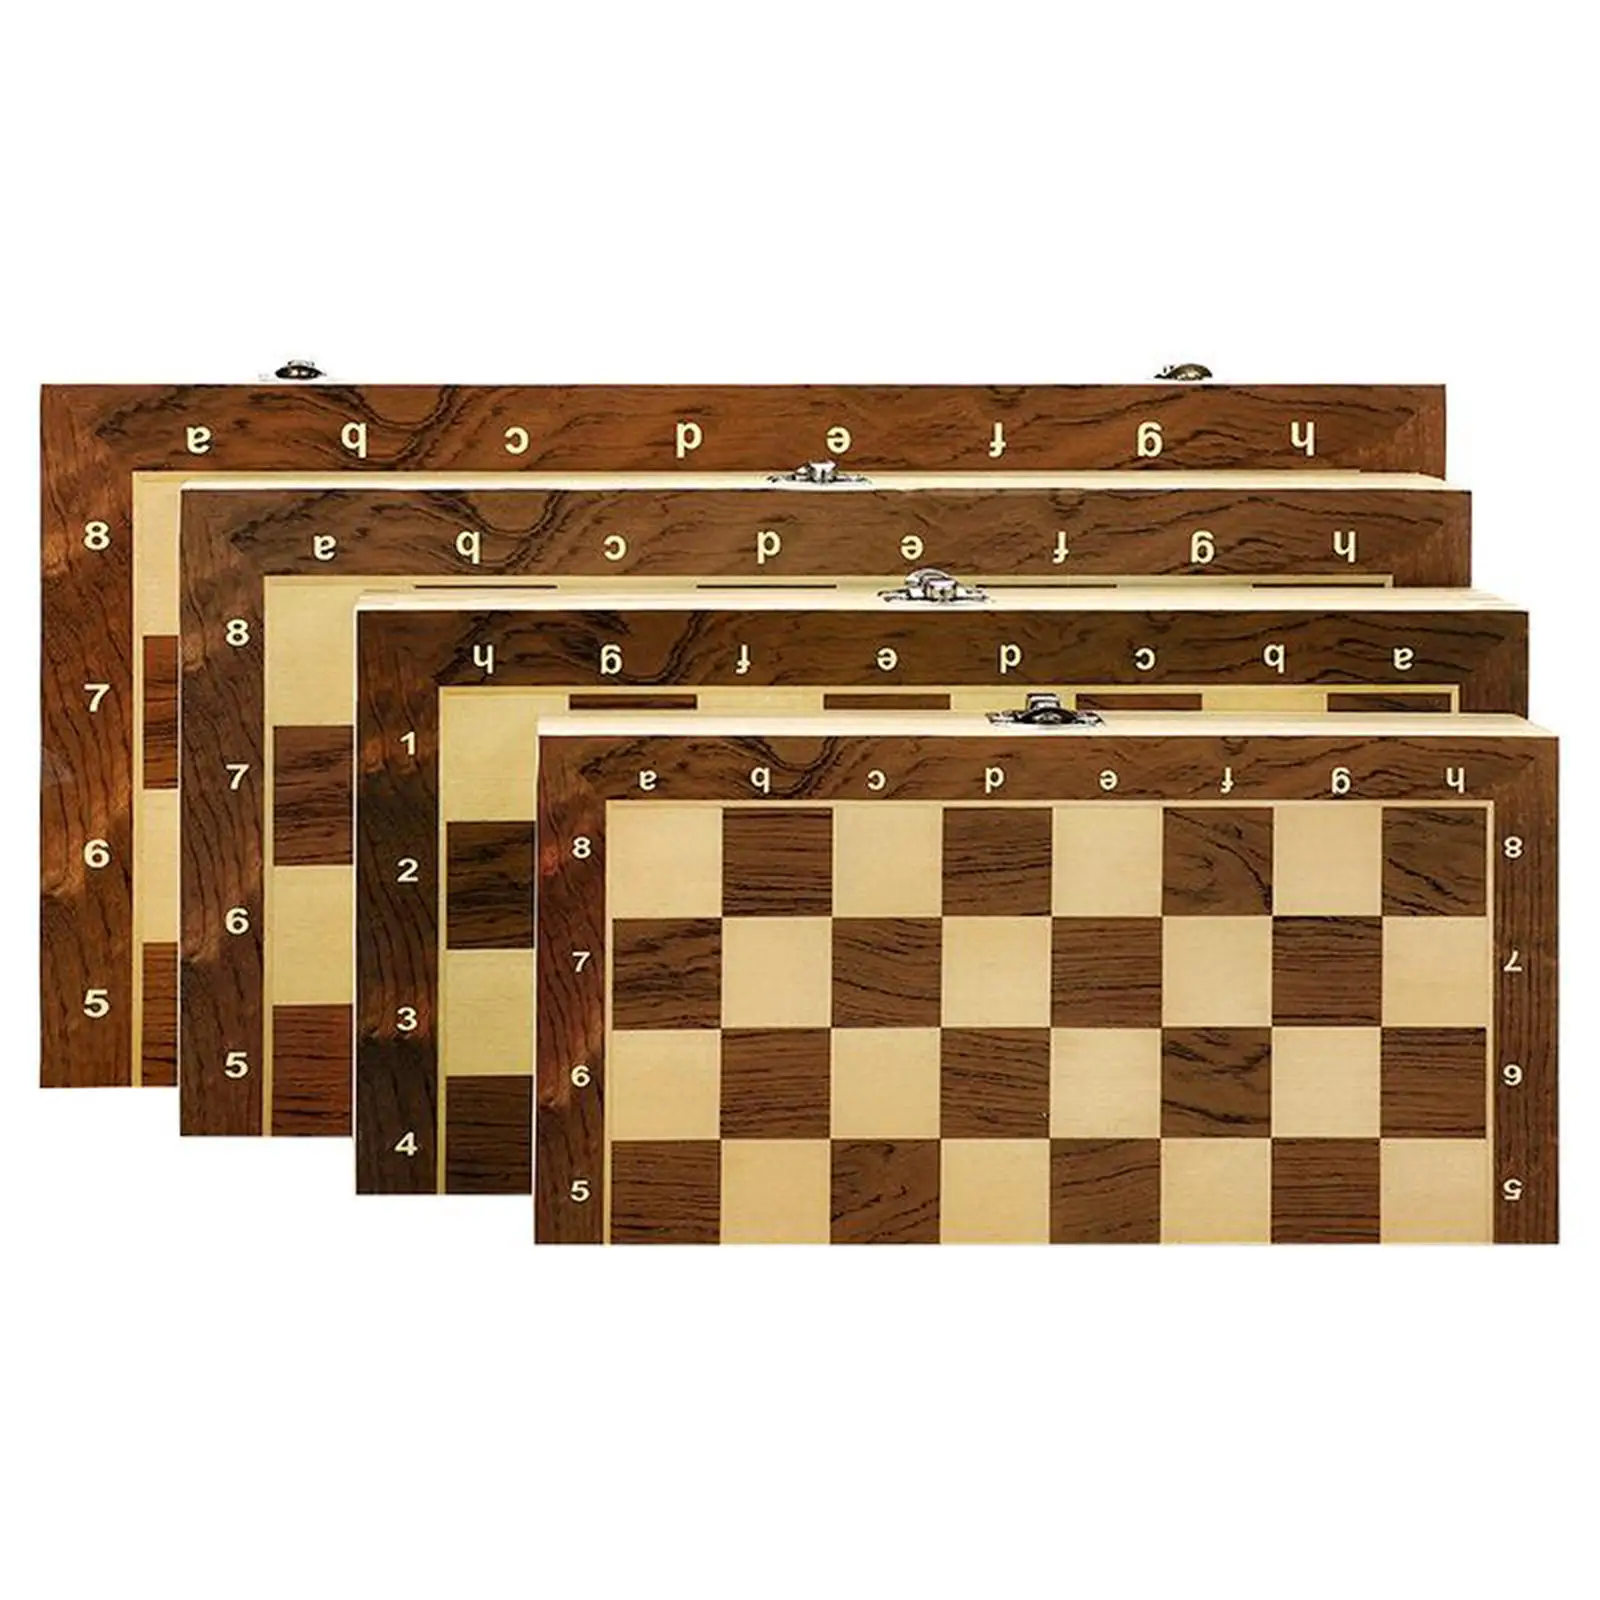 Magnetic Folding Board Travel Portable Tournament Chess Set  Kids Gift Toy 